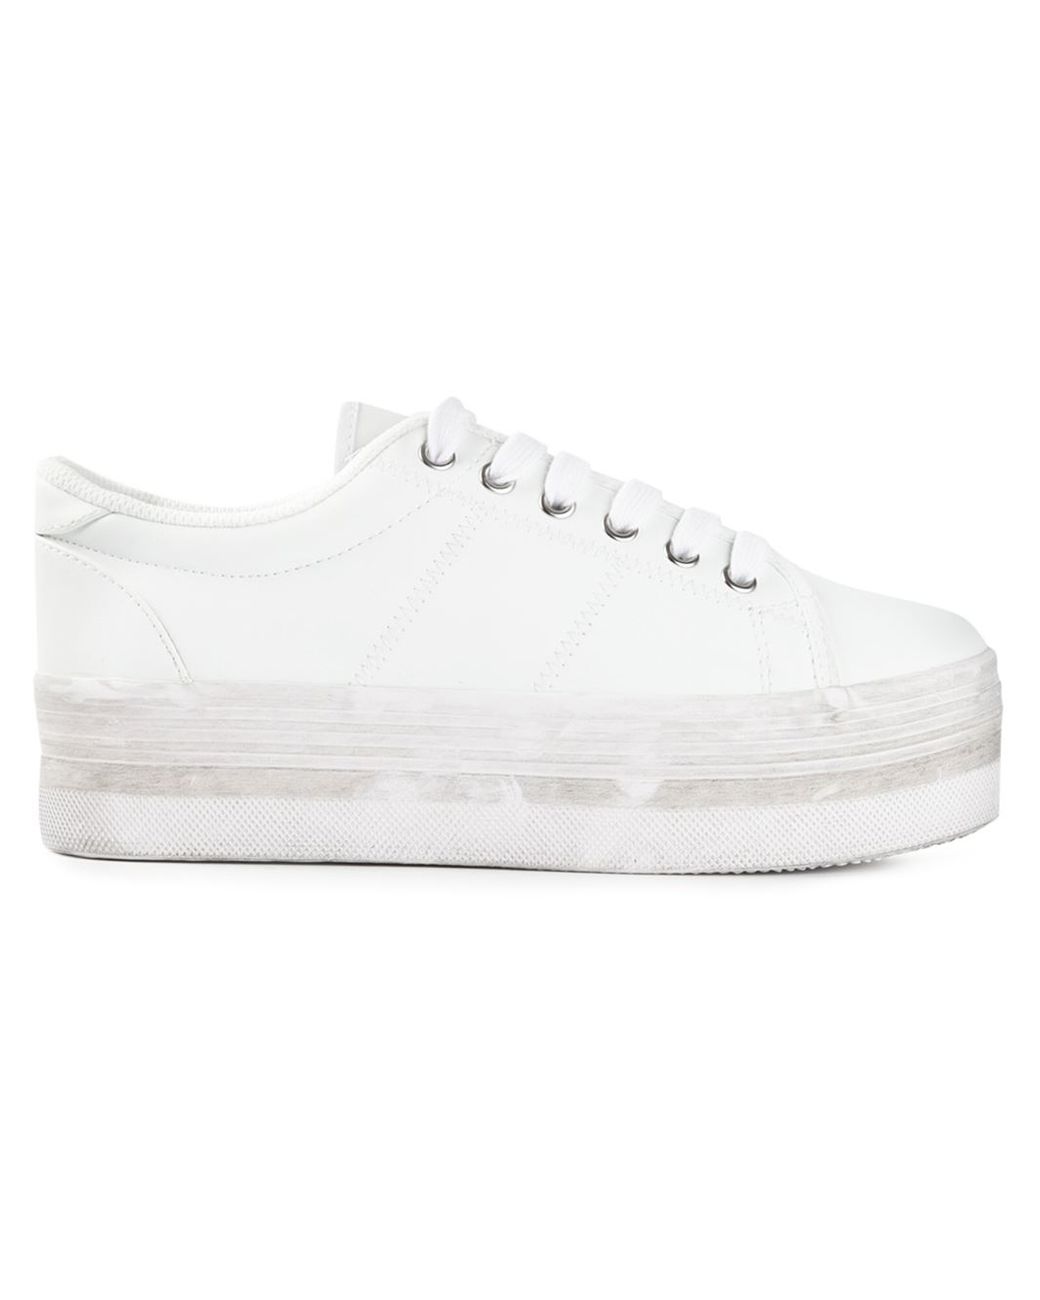 Jeffrey Campbell 'Zomg' Platform Sneakers in White | Lyst